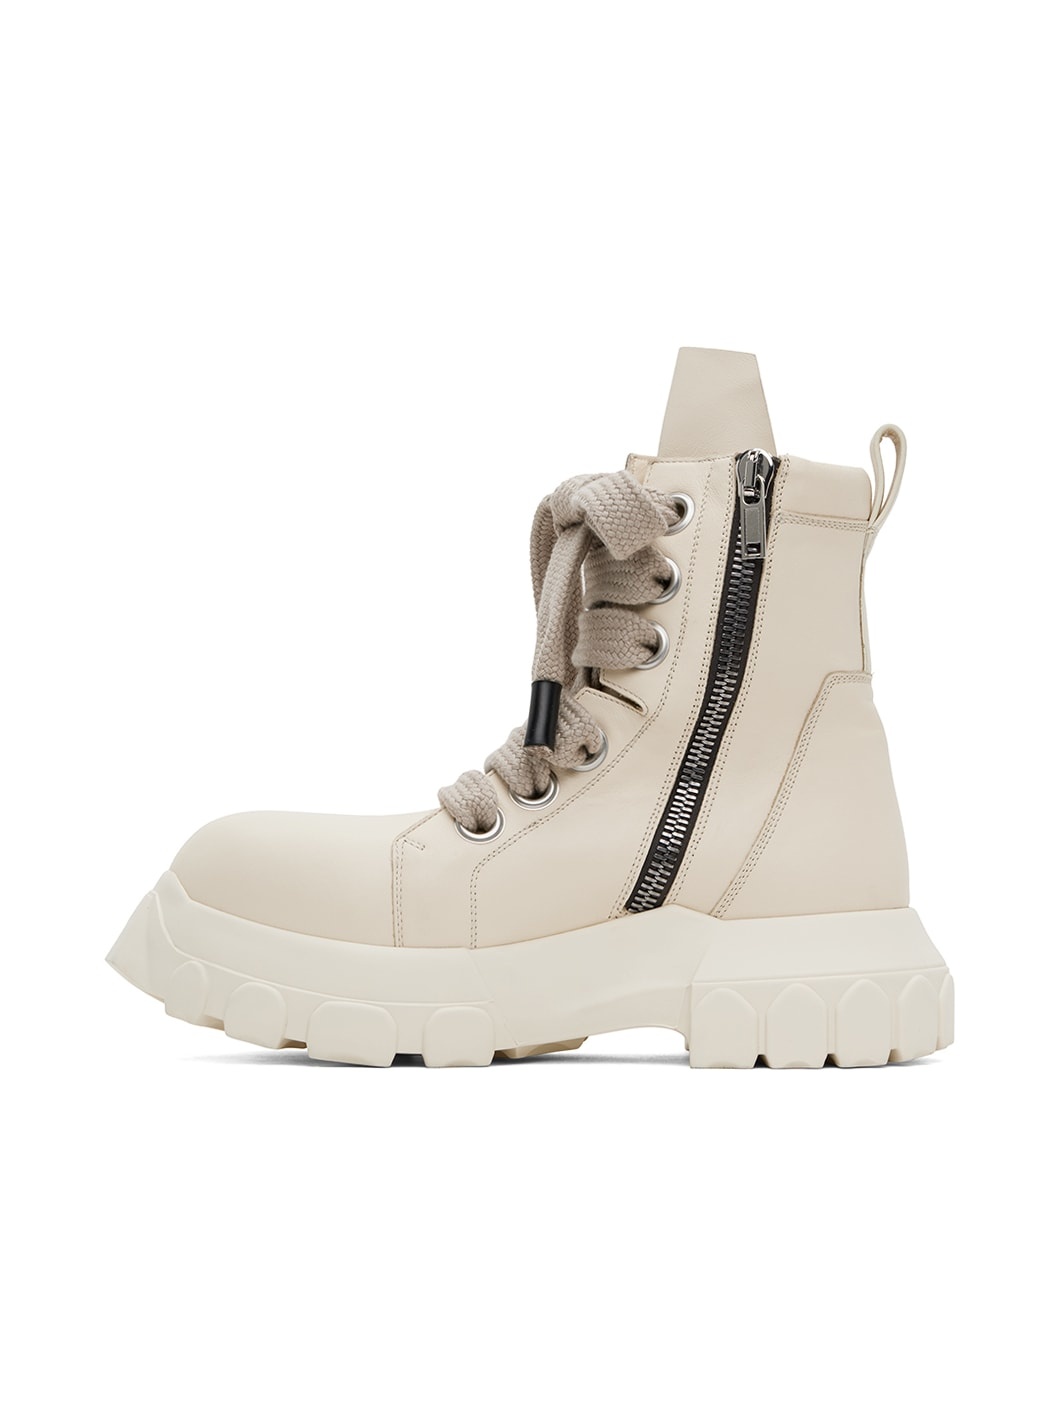 Off-White Jumbo Laced Bozo Tractor Boots - 3